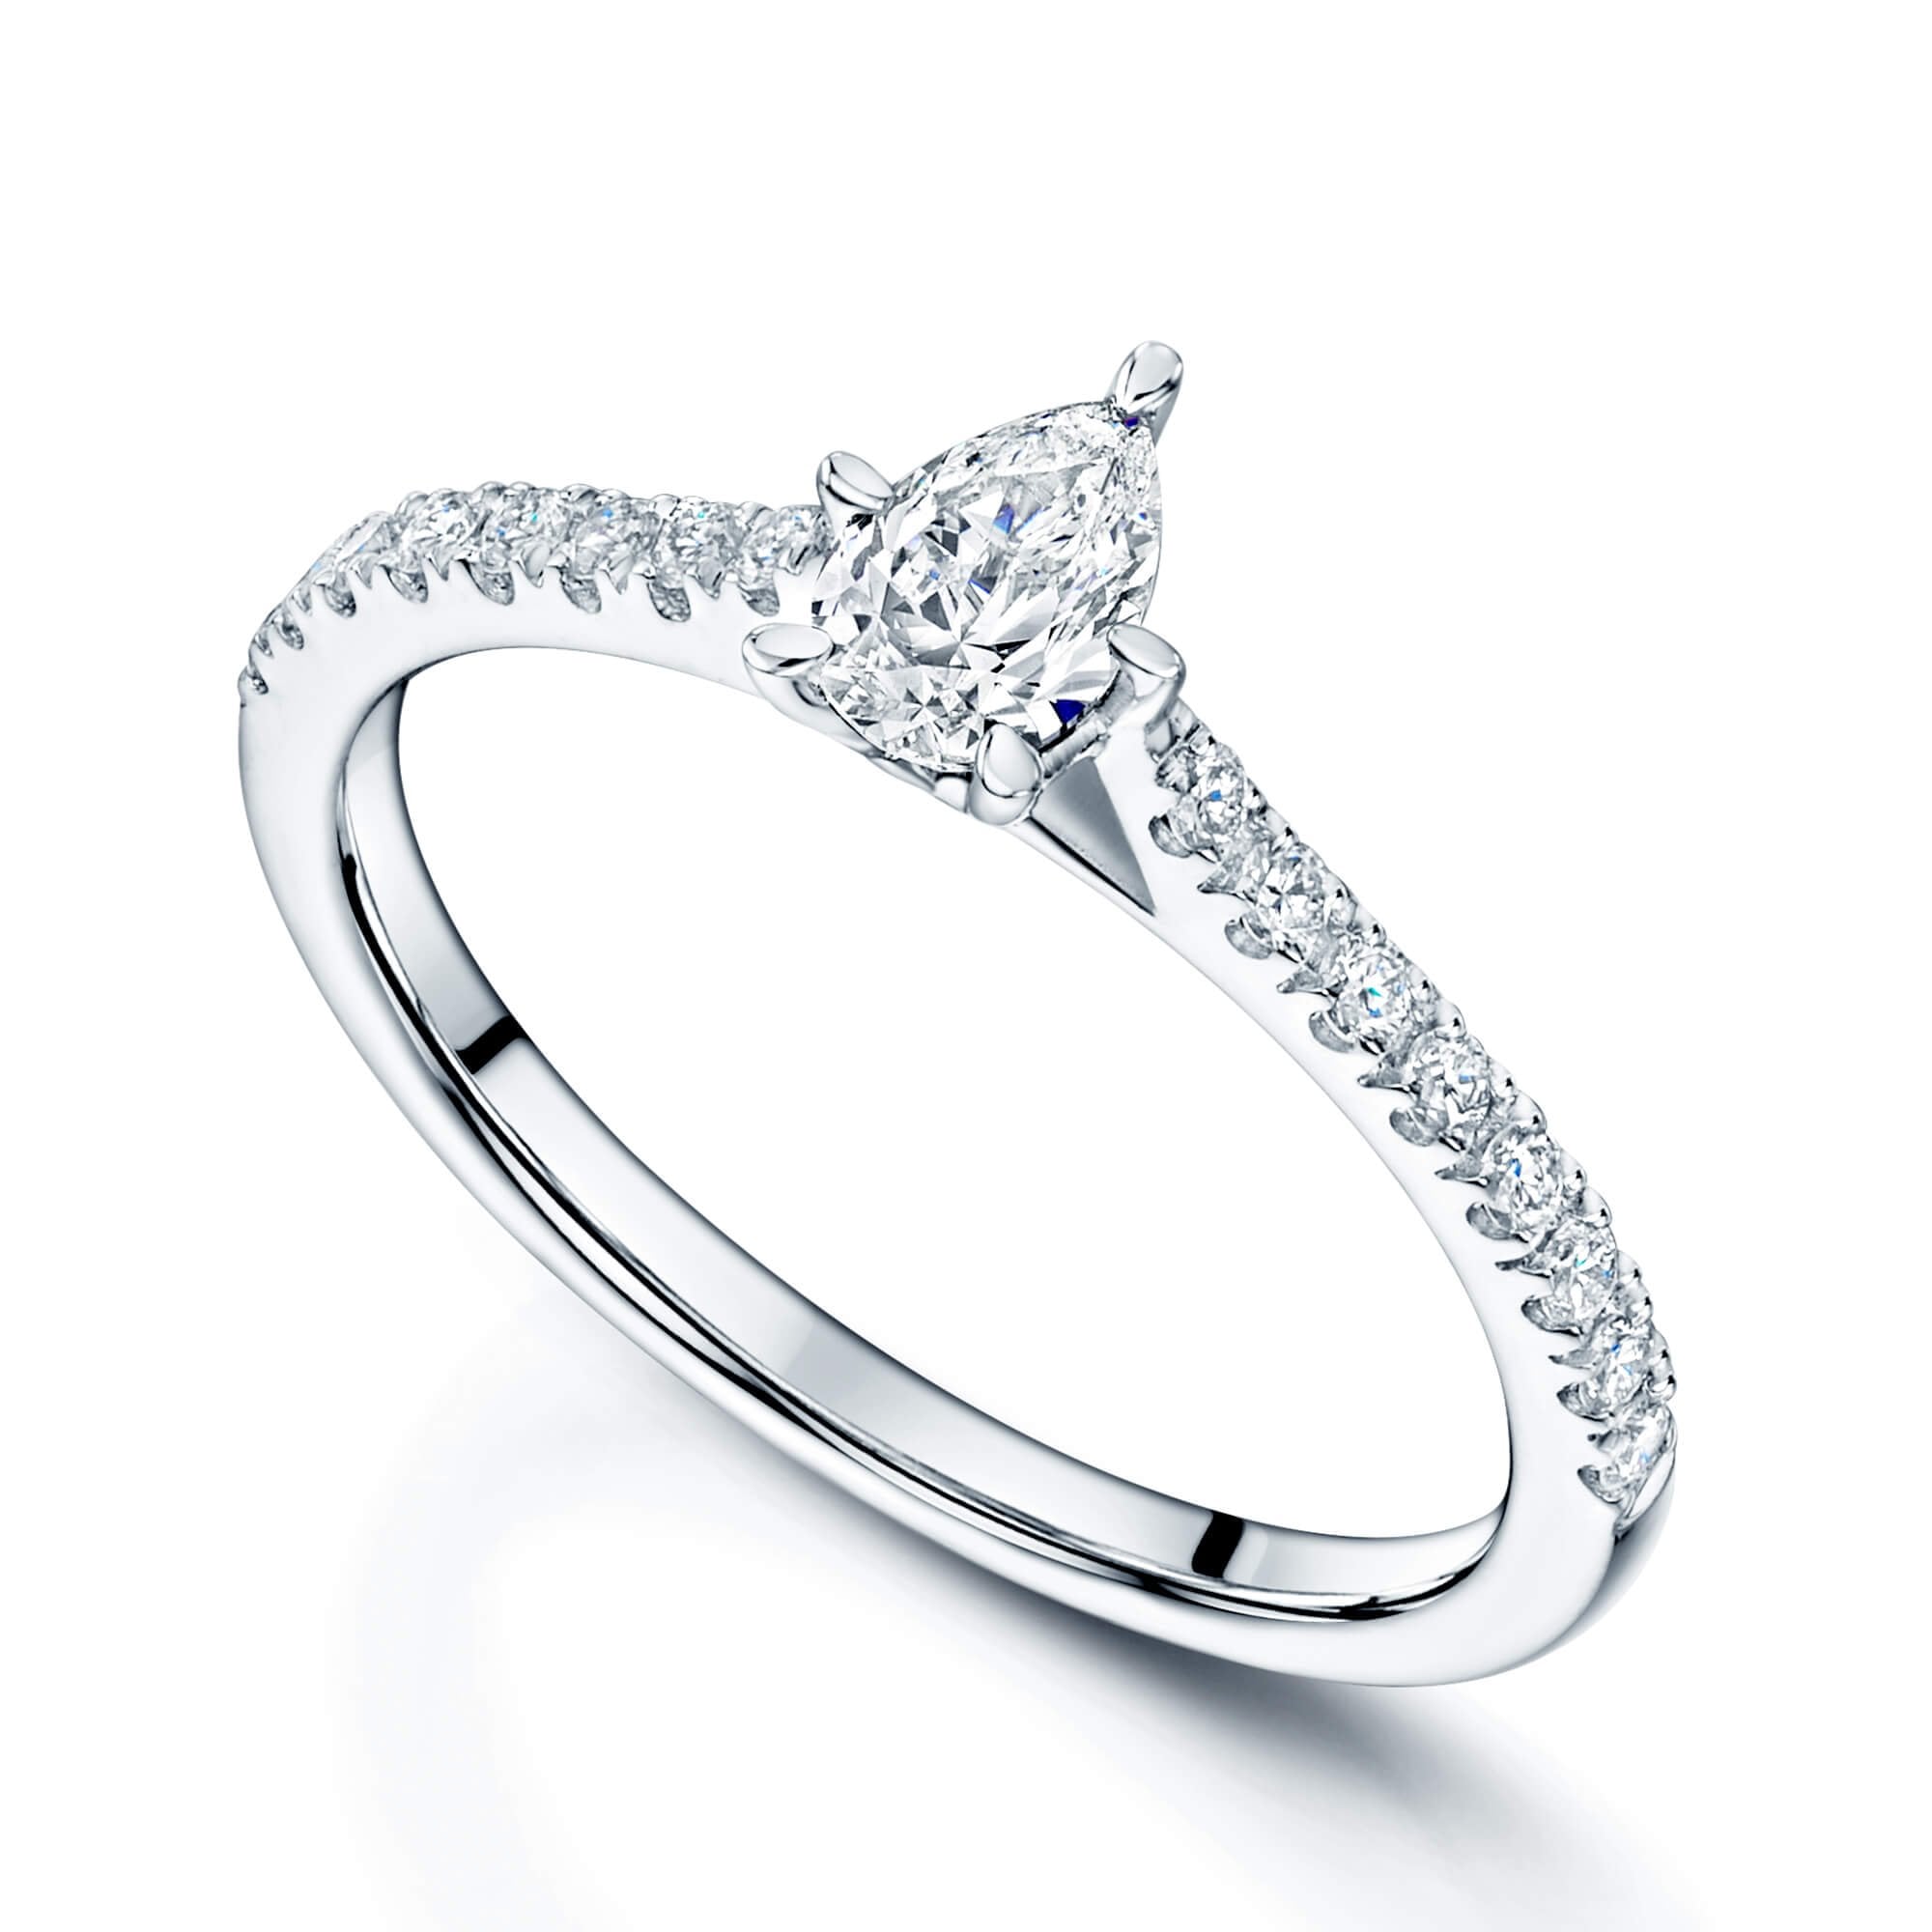 Platinum GIA Certificated Single Stone 0.30ct Pear Cut Diamond Ring With 0.18ct  Diamond Set Shoulders